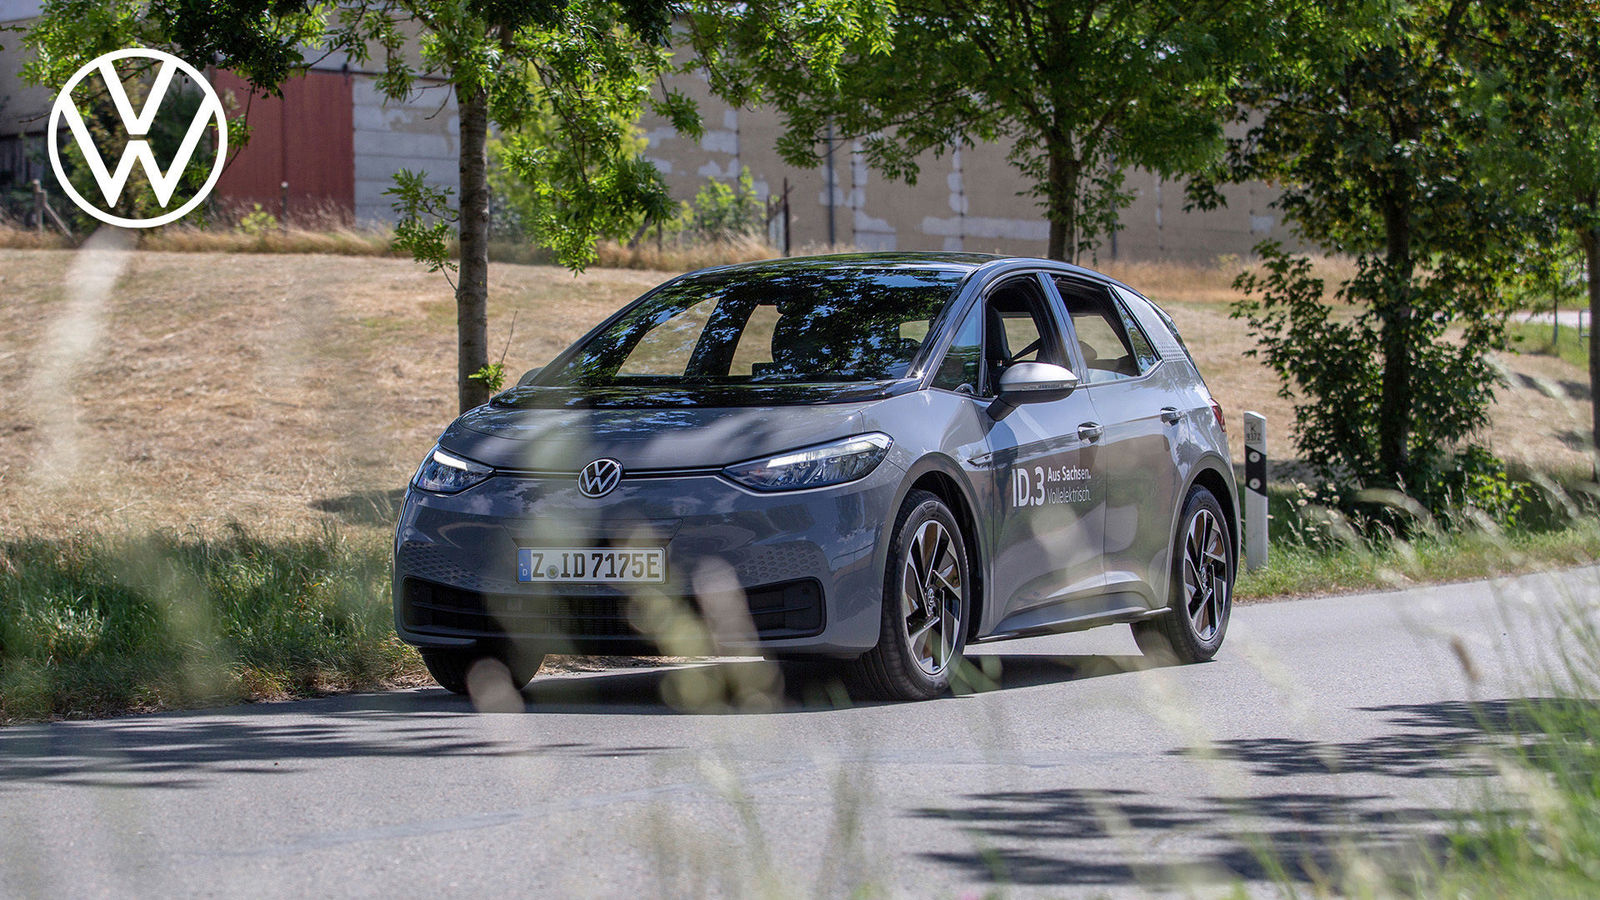 Video - Range record: ID.3 makes the journey from Zwickau to Switzerland on a single charge